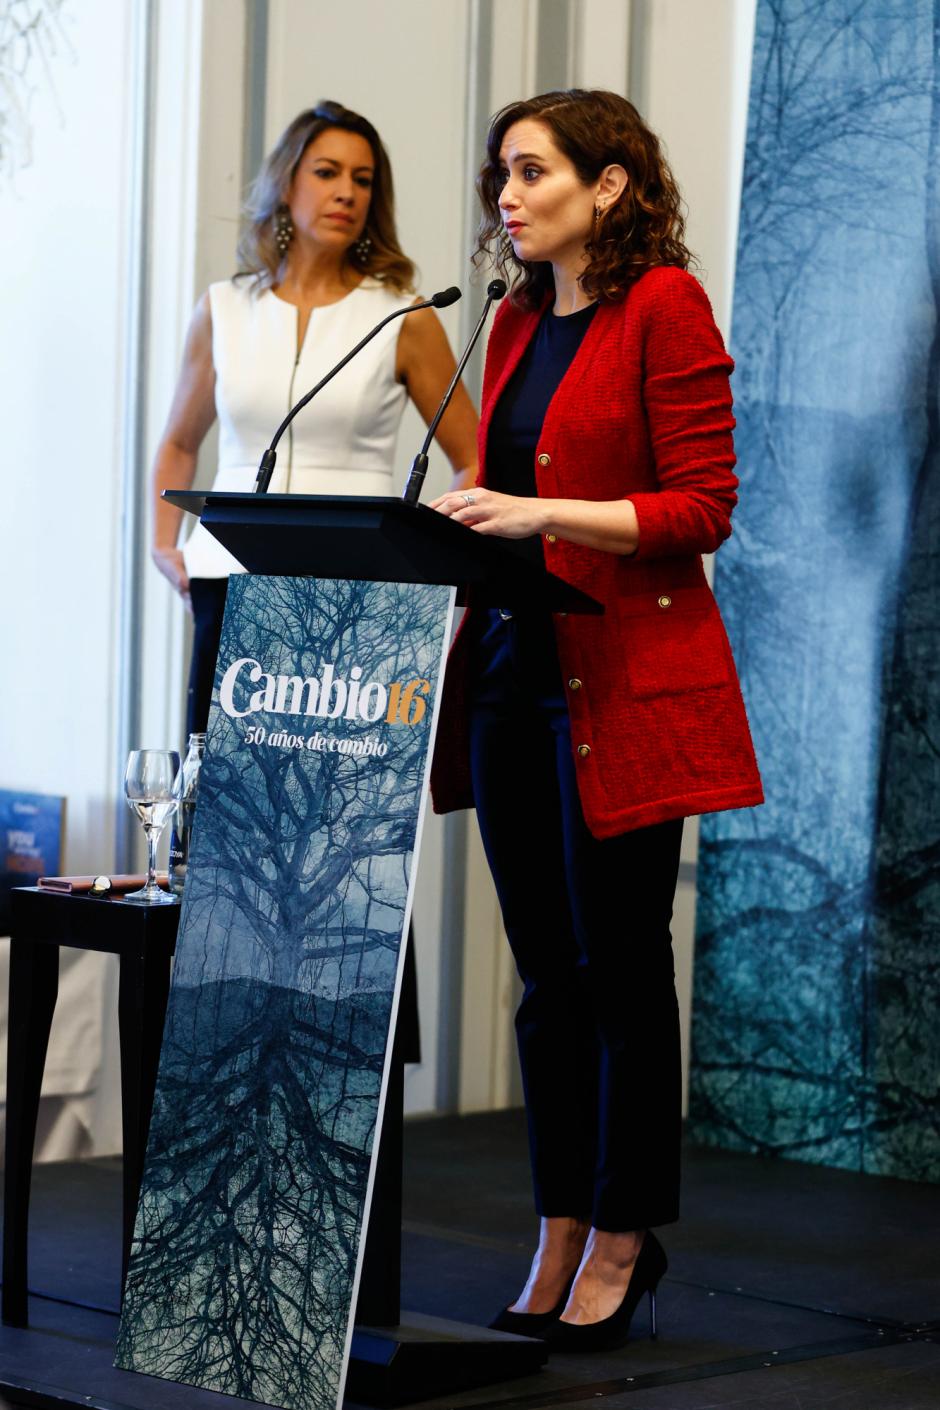 Isabel Díaz Ayuso during the Cambio 16 awards ceremony in Madrid, November 29, 2021.